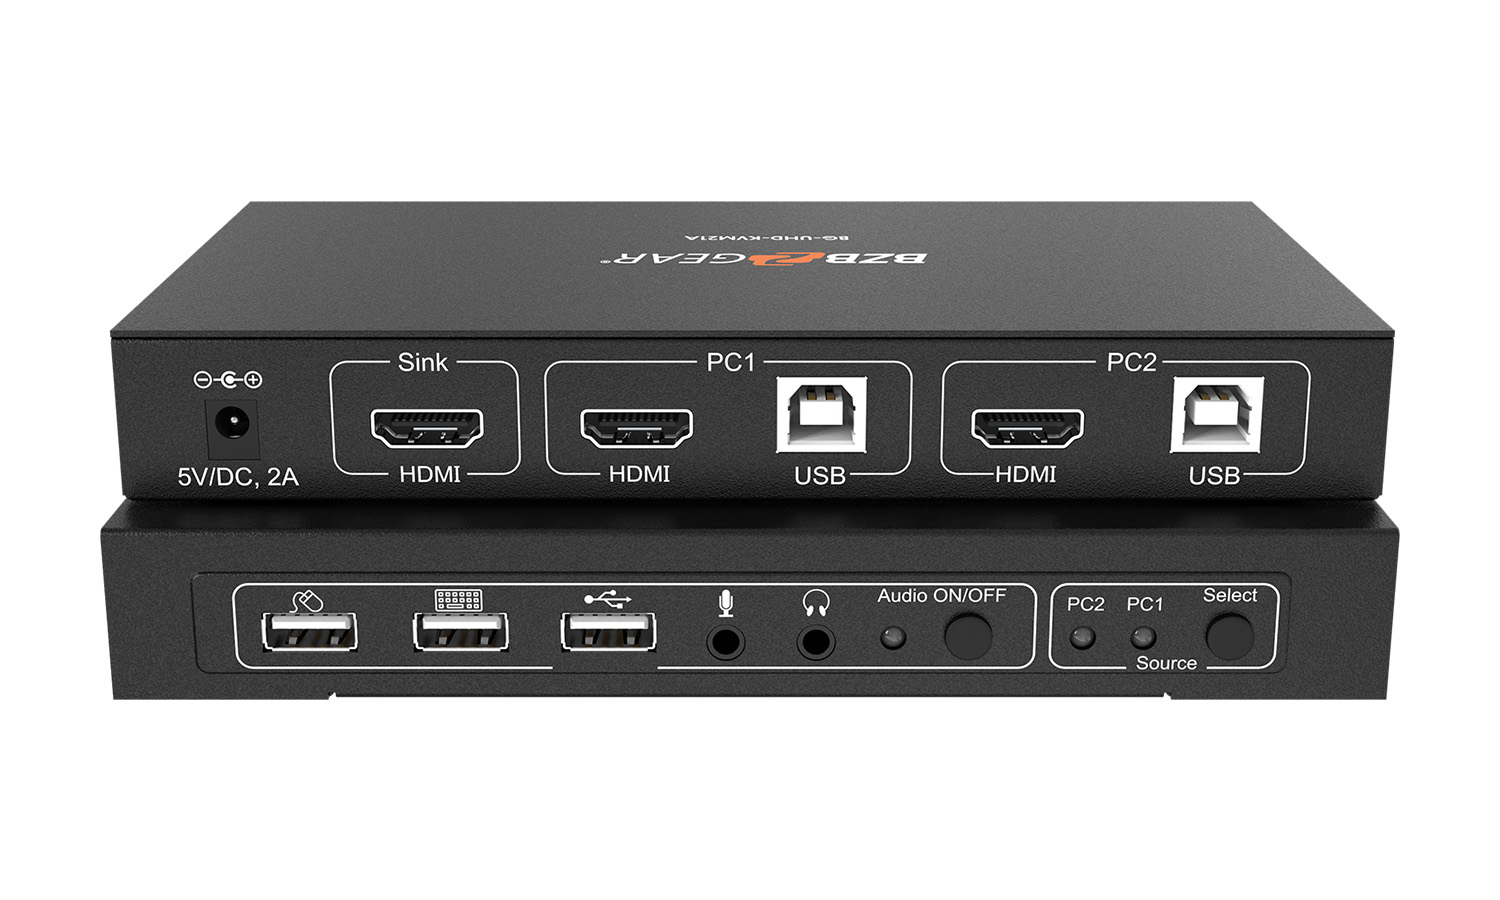 BZBGEAR BG-UHD-KVM21A 2X1 KVM Switcher with USB2.0 Ports for Peripherals and 3.5mm Jacks for Audio Support